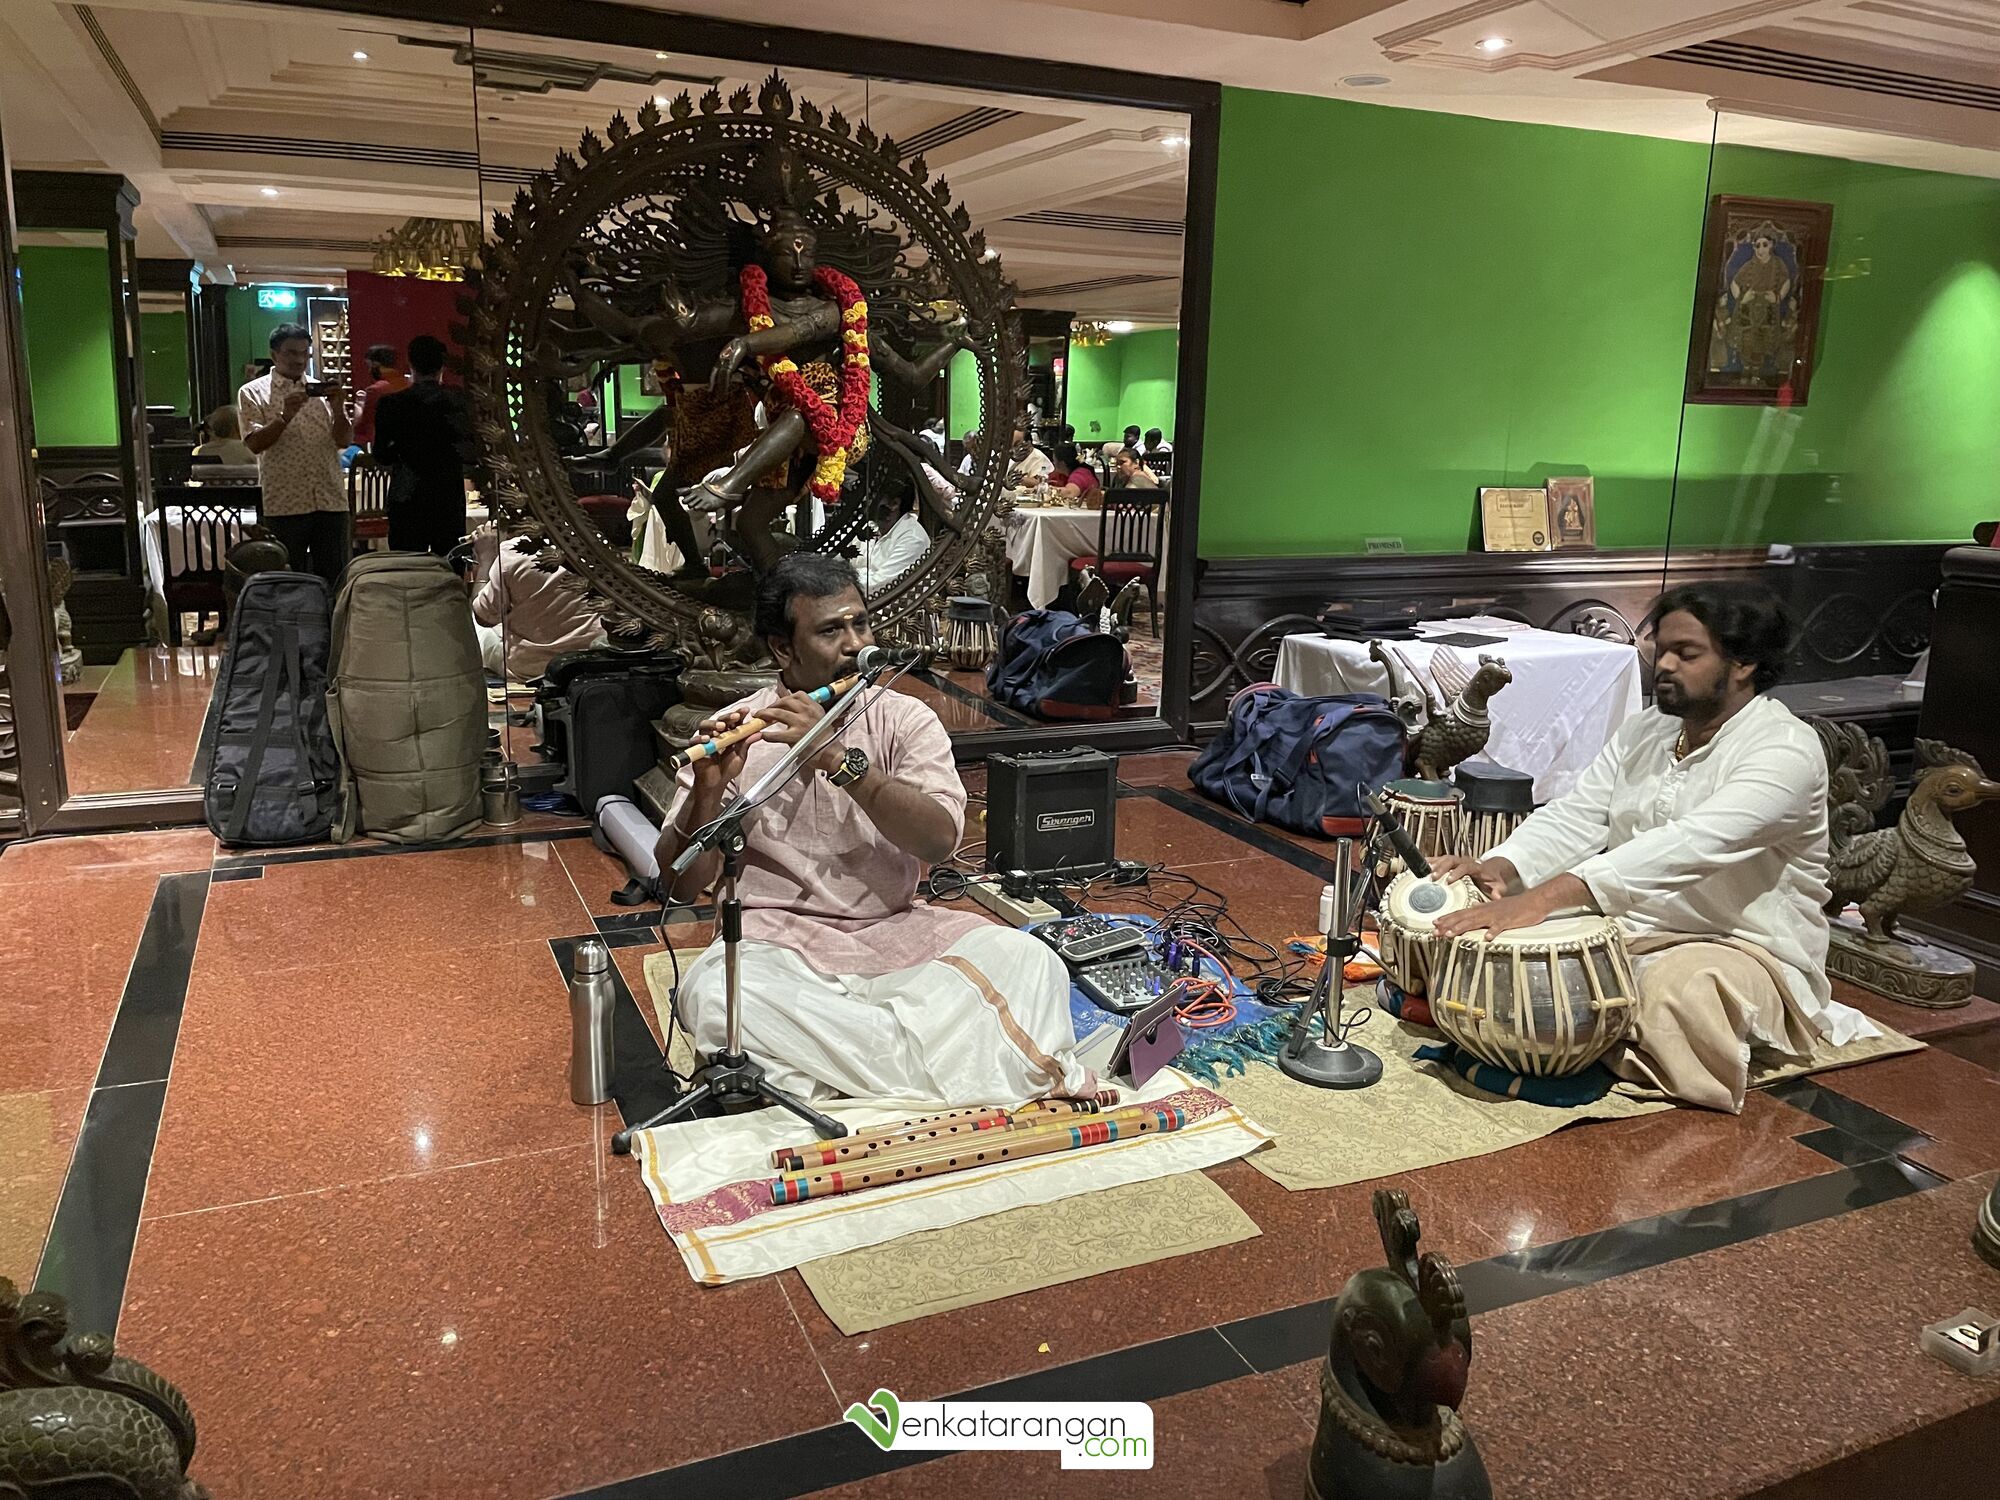 Live music performance at the Dakshin, The South Indian Restaurant at the Adyar Gate Hotel